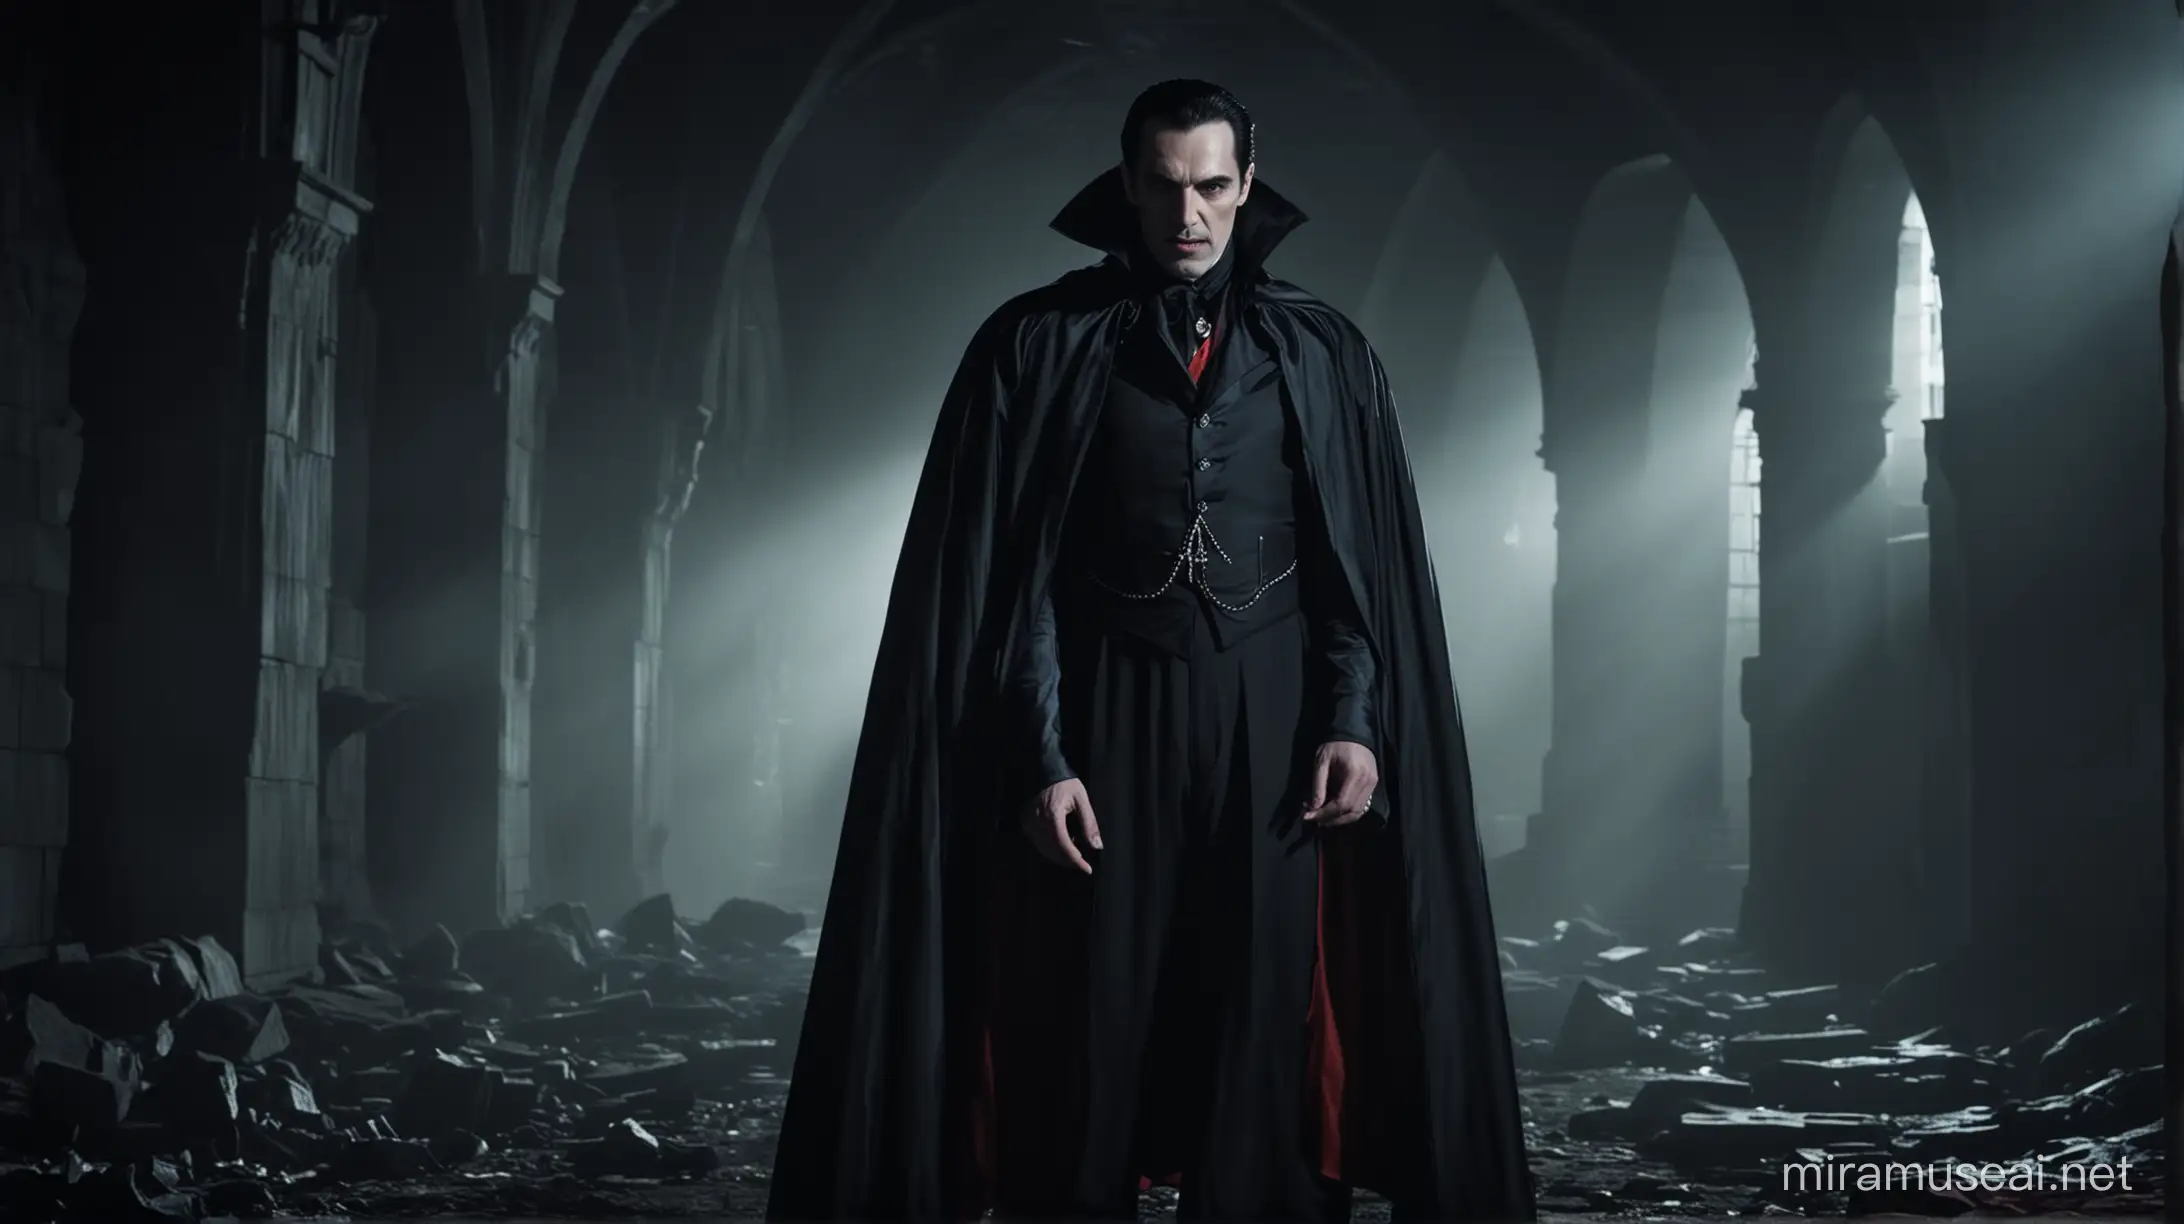 Count dracula in a dark environment